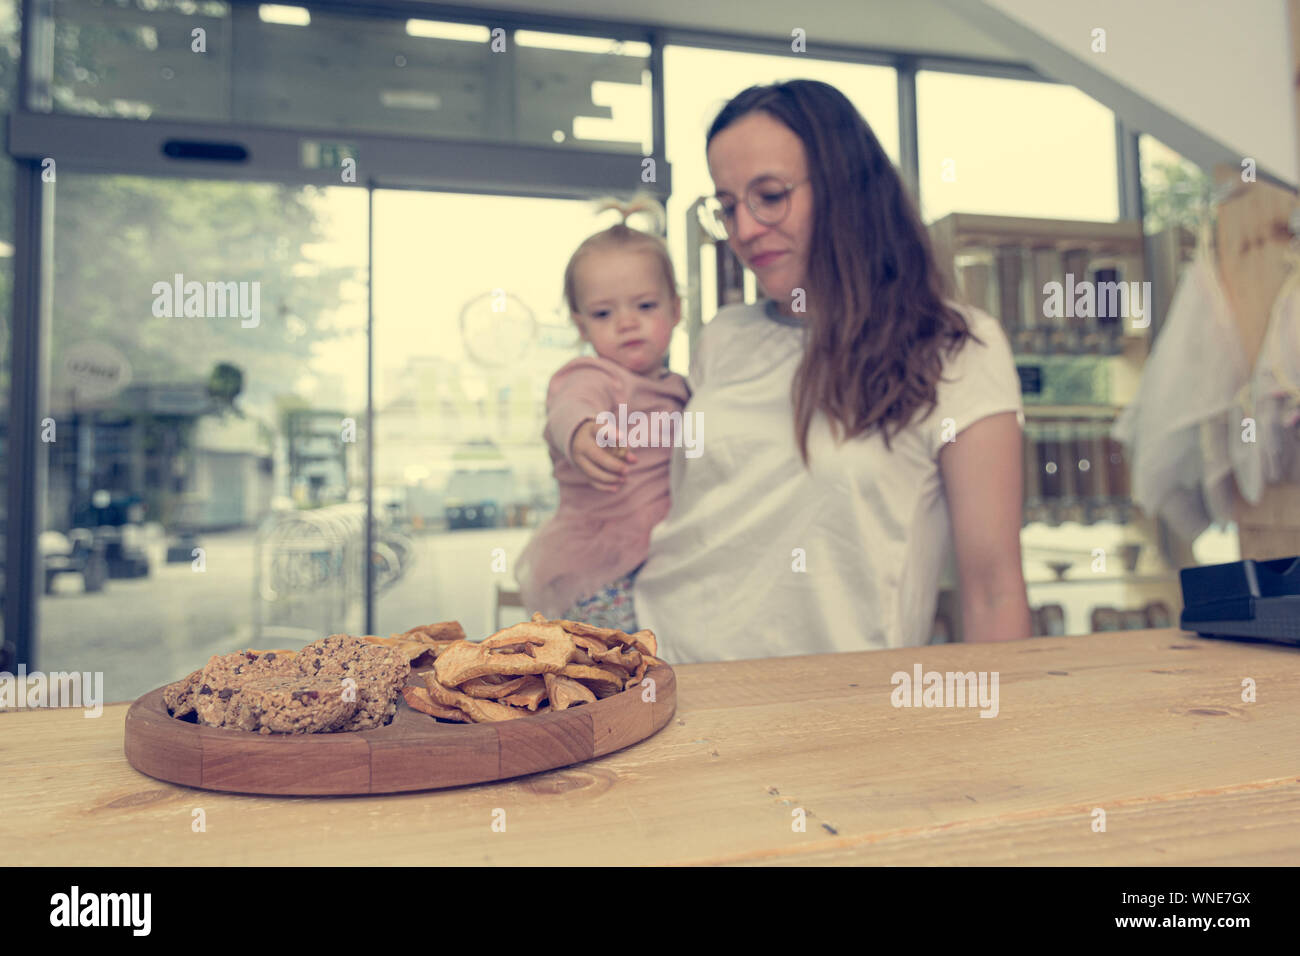 Cute adorable girl trying cookies at organic store with her mother.Degustaion of healthy desert. Stock Photo